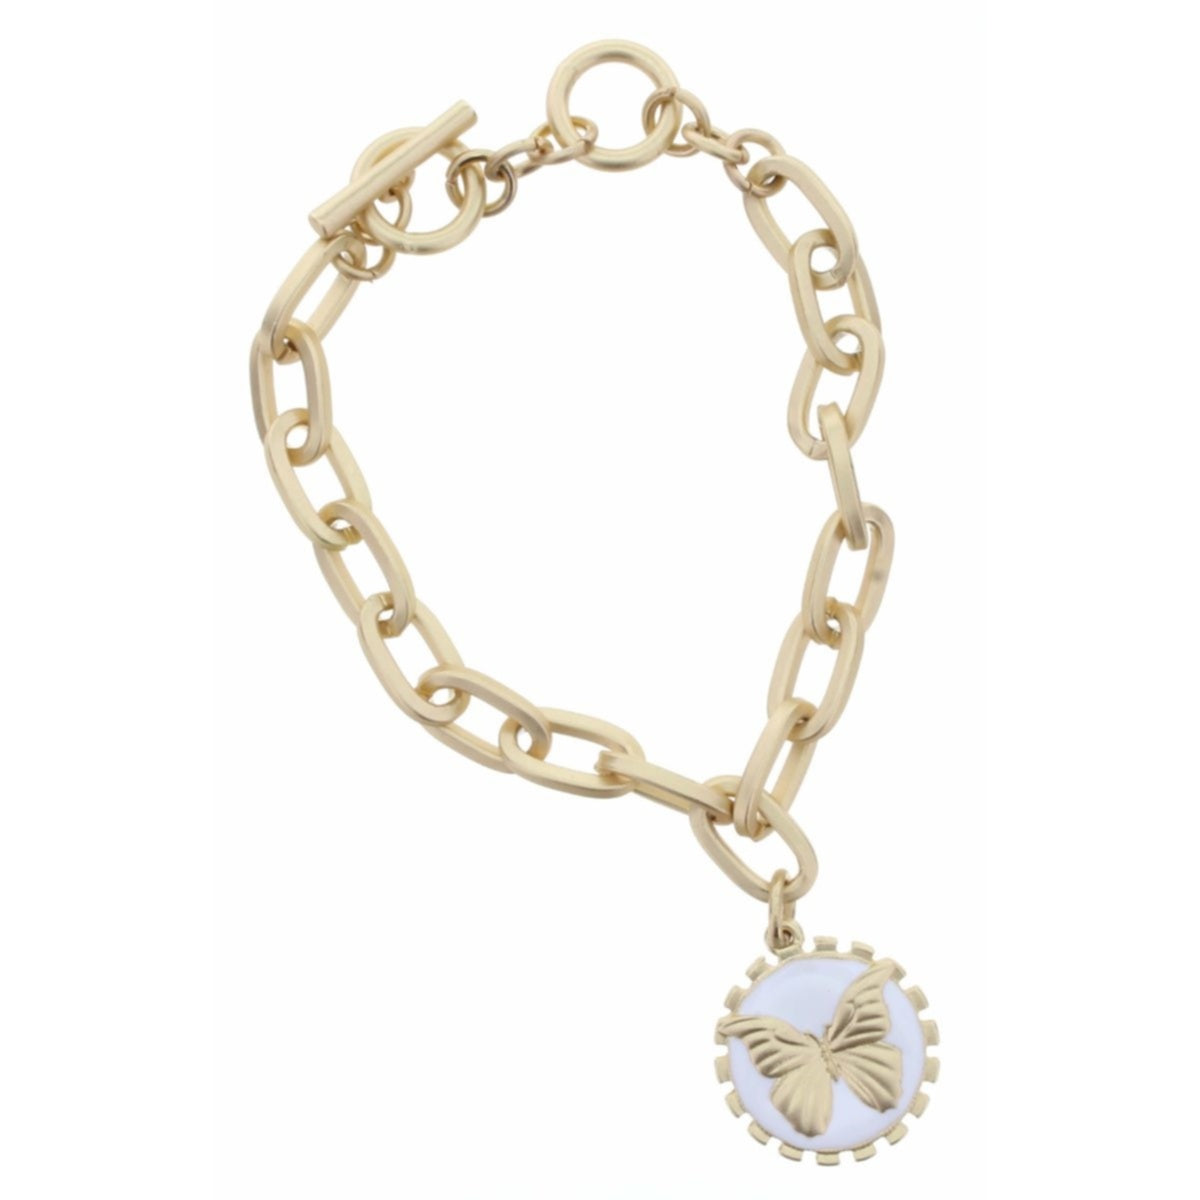 Gold Toggle Chain with Butterfly White Enamel Charm Bracelet